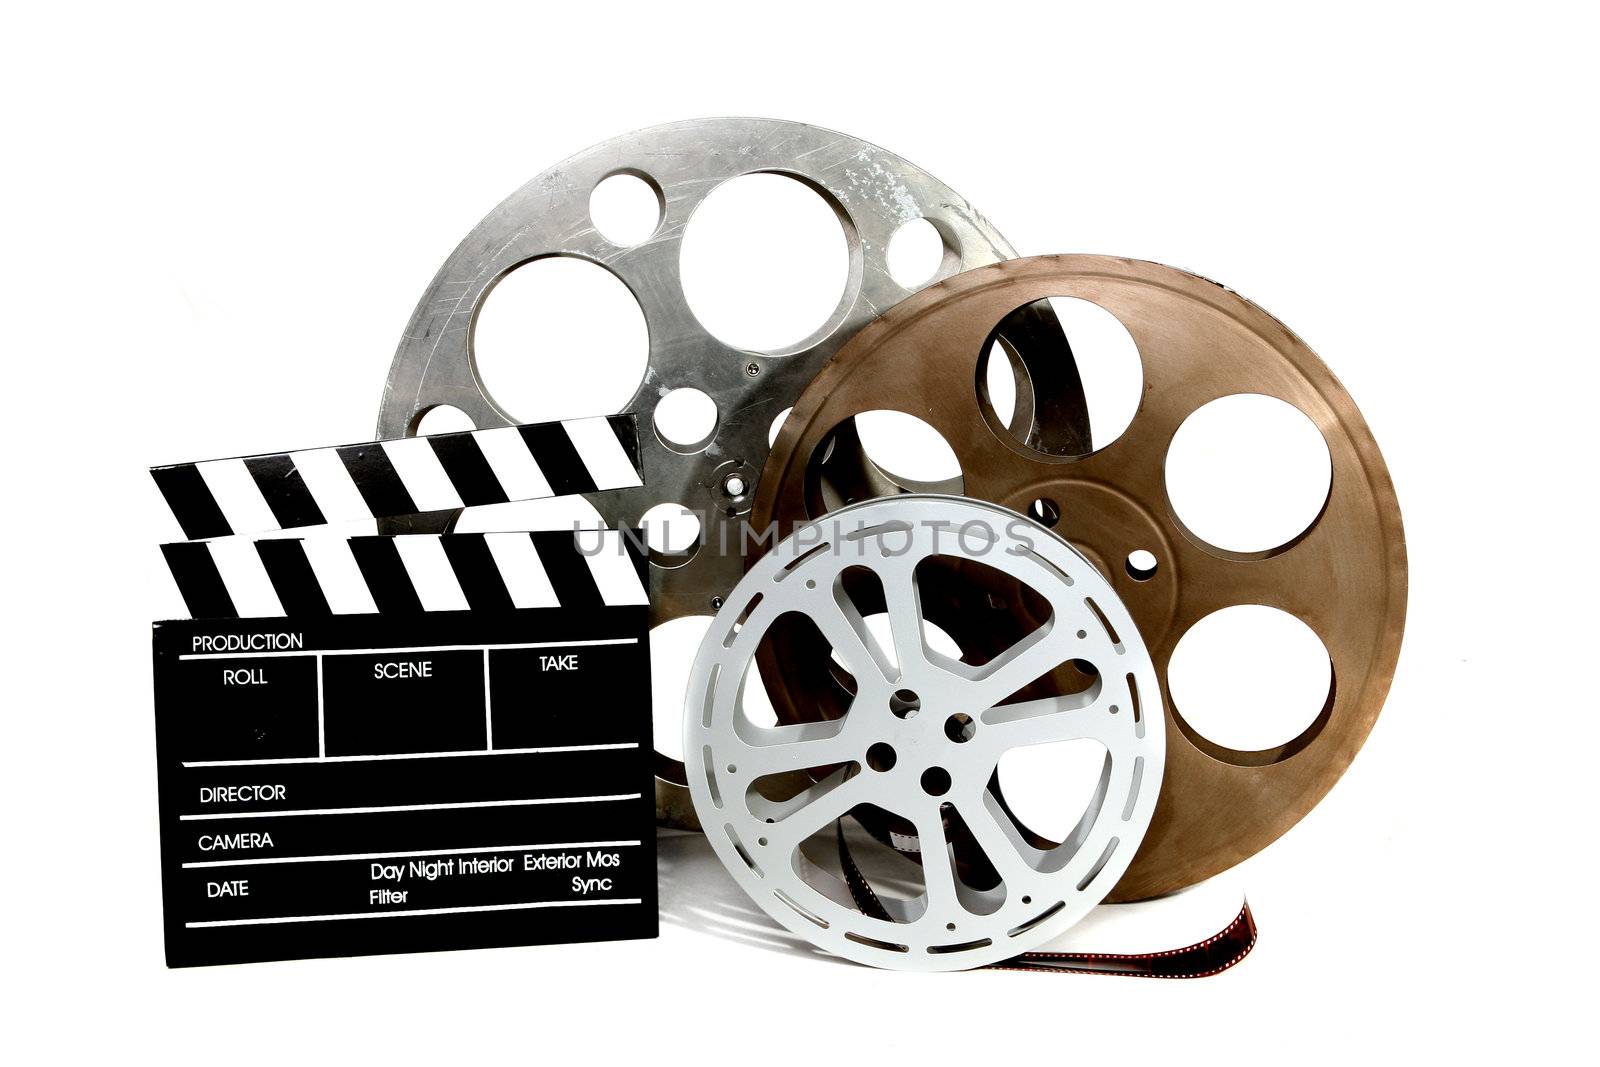 Movie Production Clapper and Film Tins on White by tobkatrina